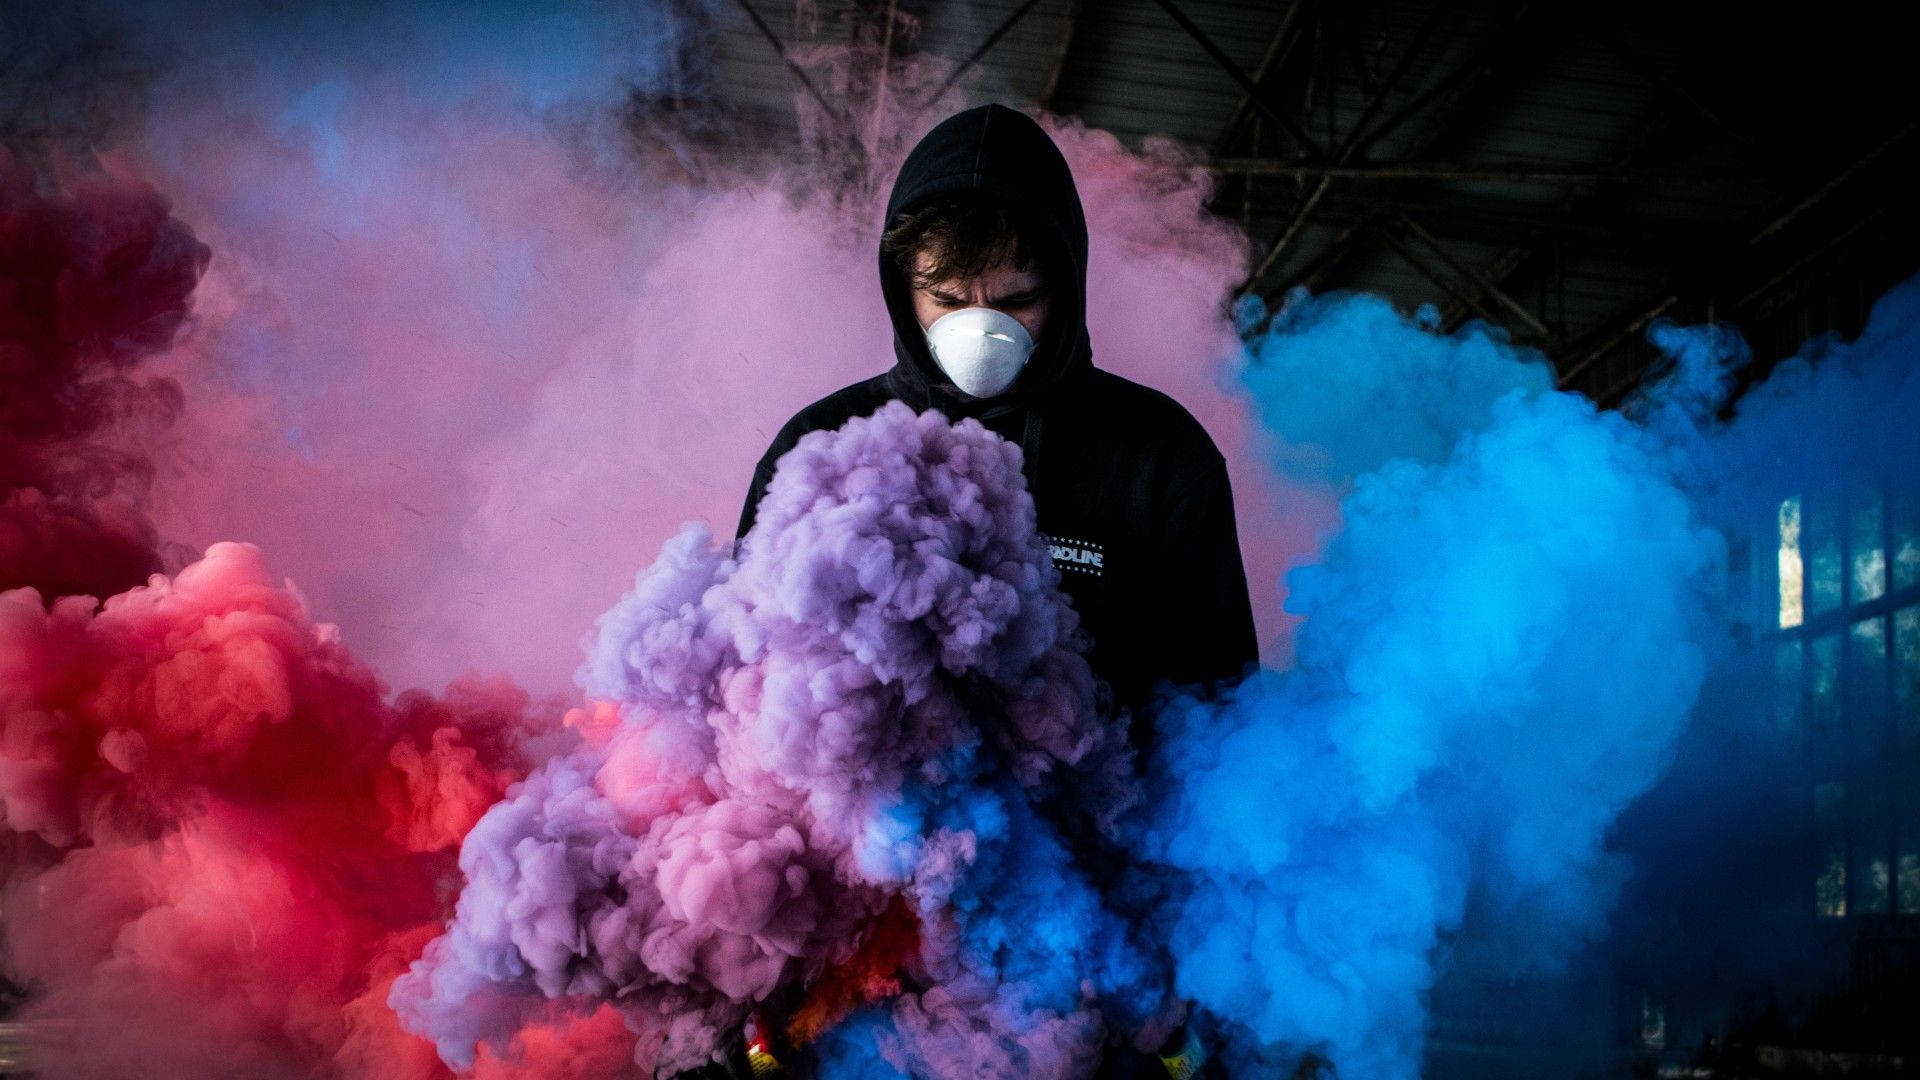 Man Engulfed With Colorful Gas Smoke Wallpaper